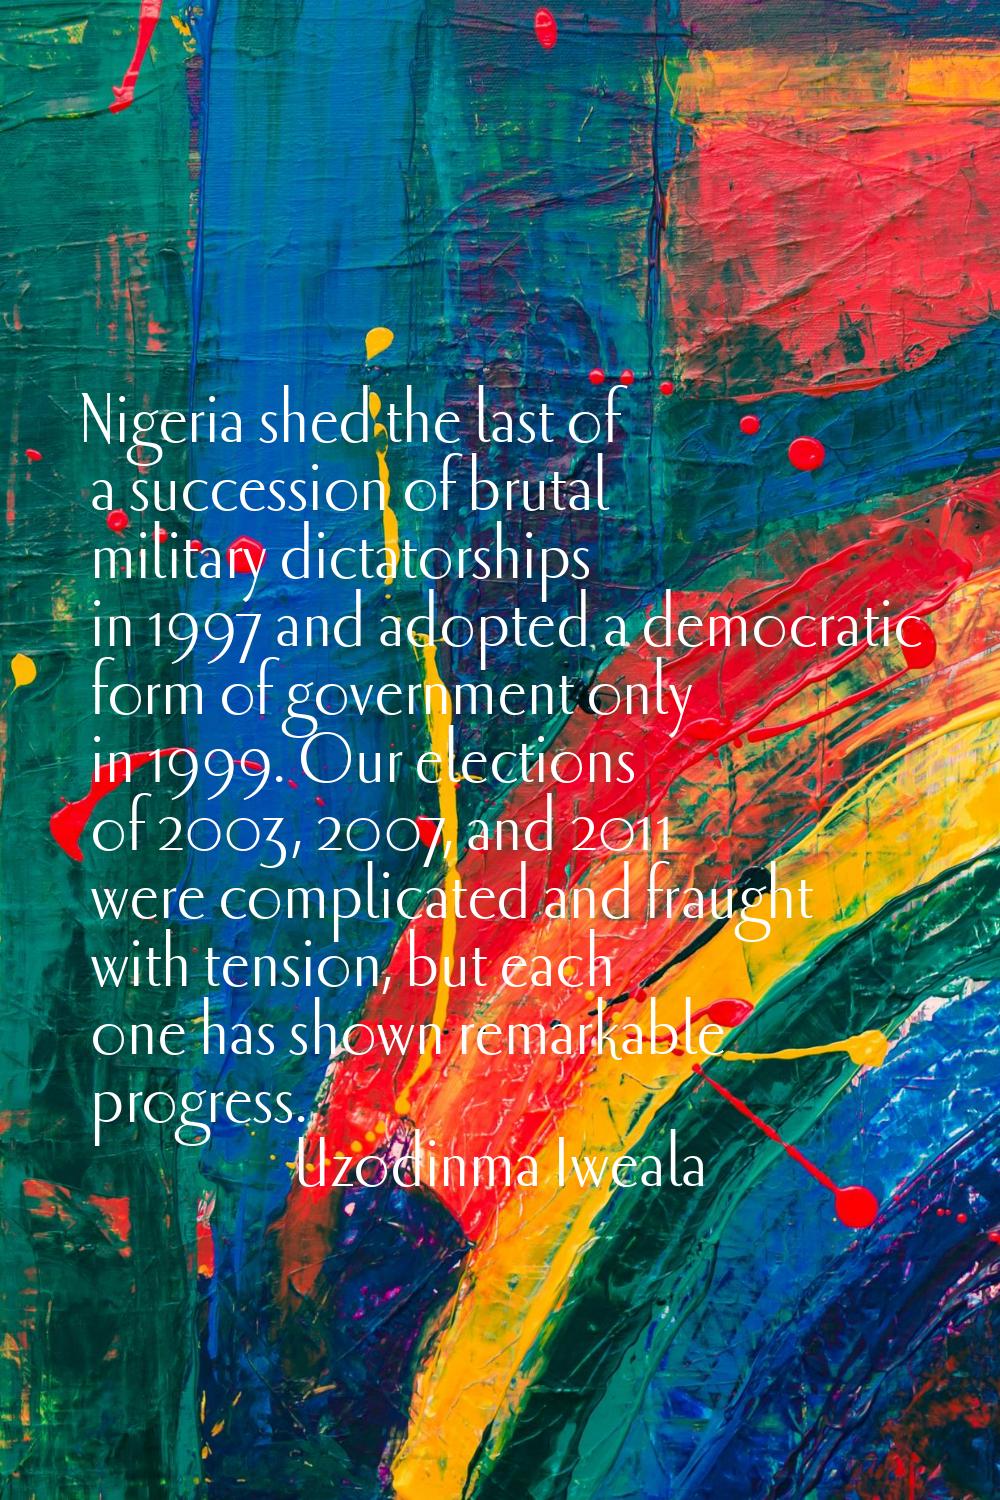 Nigeria shed the last of a succession of brutal military dictatorships in 1997 and adopted a democr